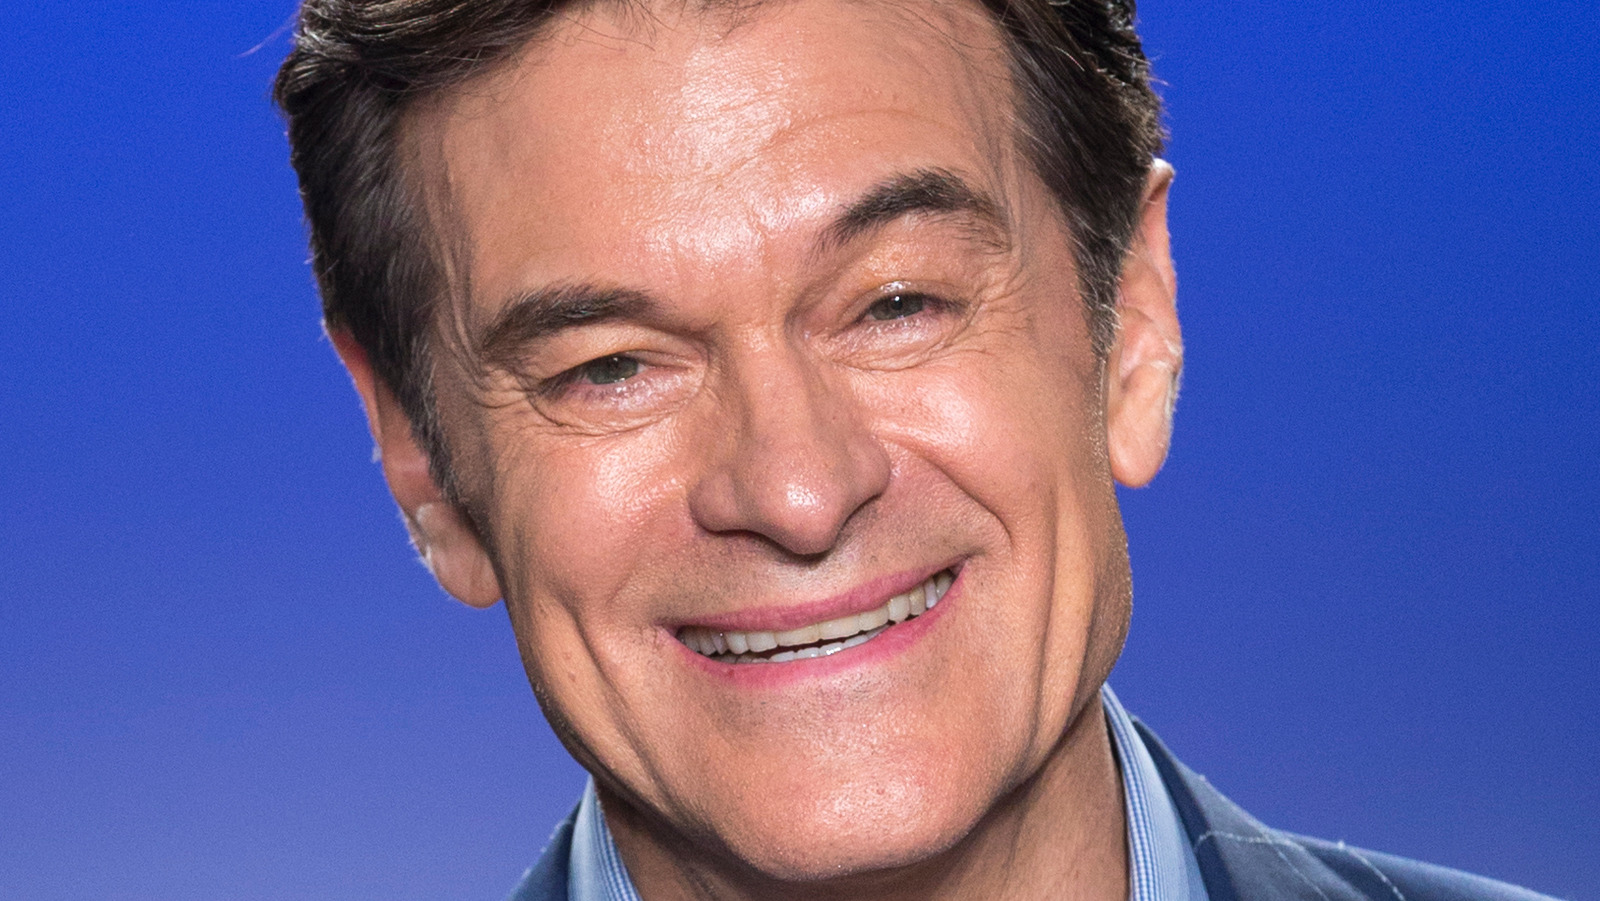 Dr. Oz's Blue Hair Commercial: Is It Safe? - wide 6